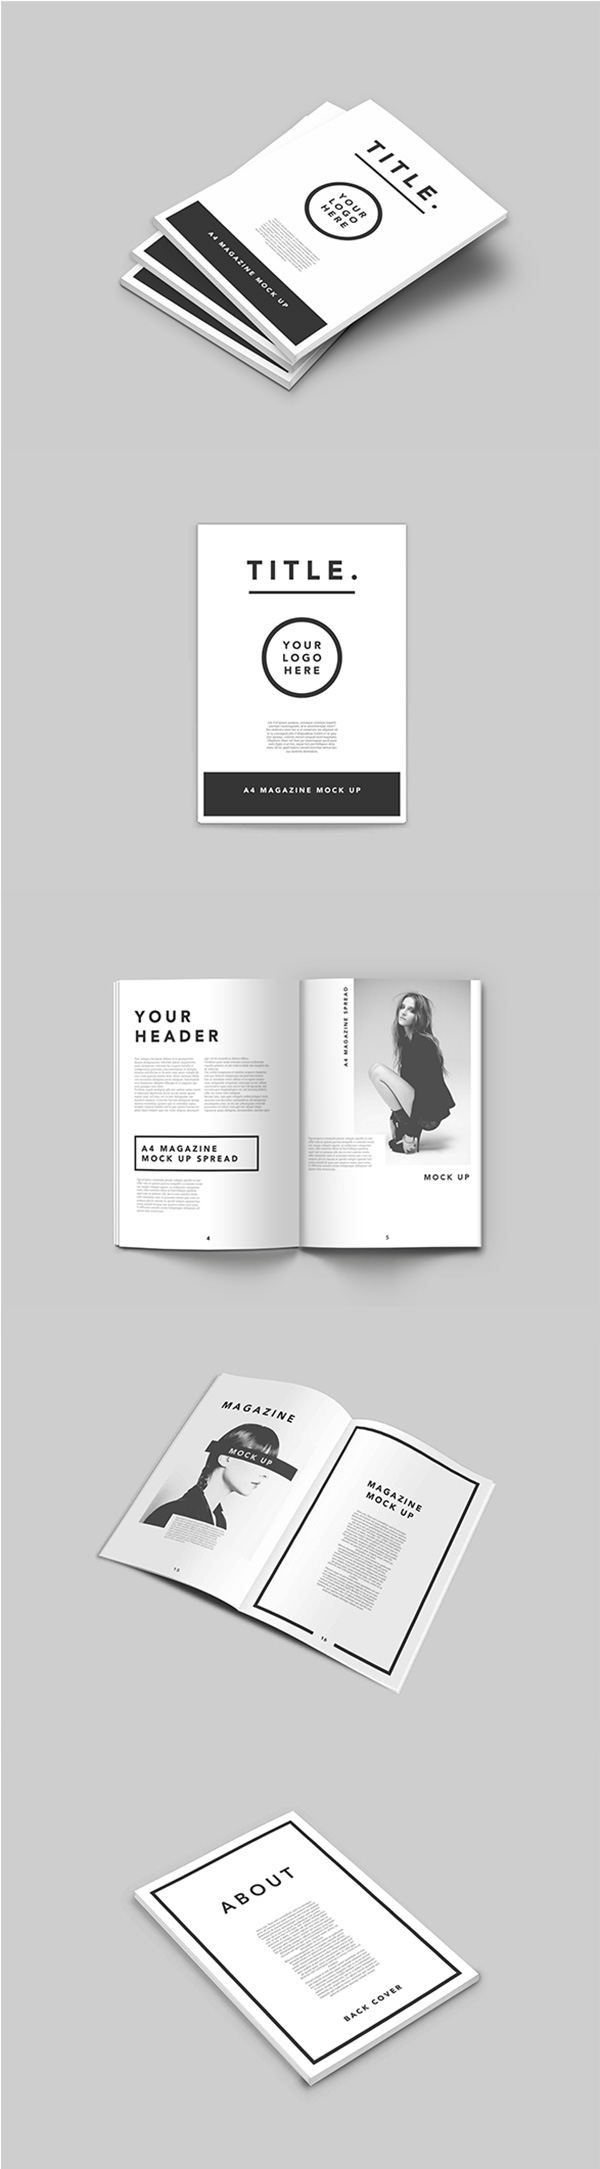 Magazine Cover Mock Up Psd